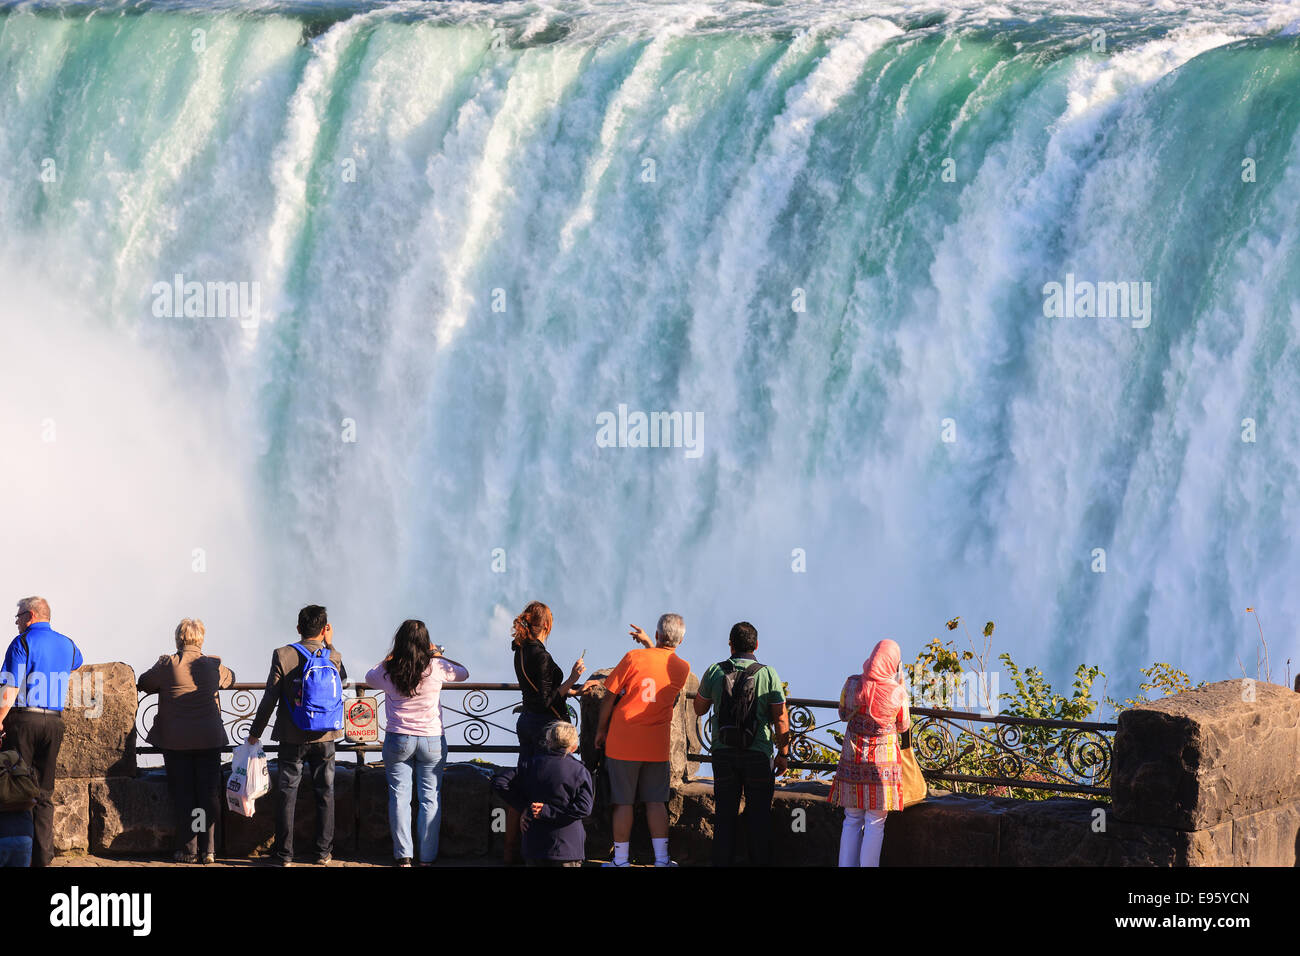 Tourists overlooking and enjoying the view at the Horseshoe Falls, part of the Niagara Falls, Ontario, Canada. Stock Photo